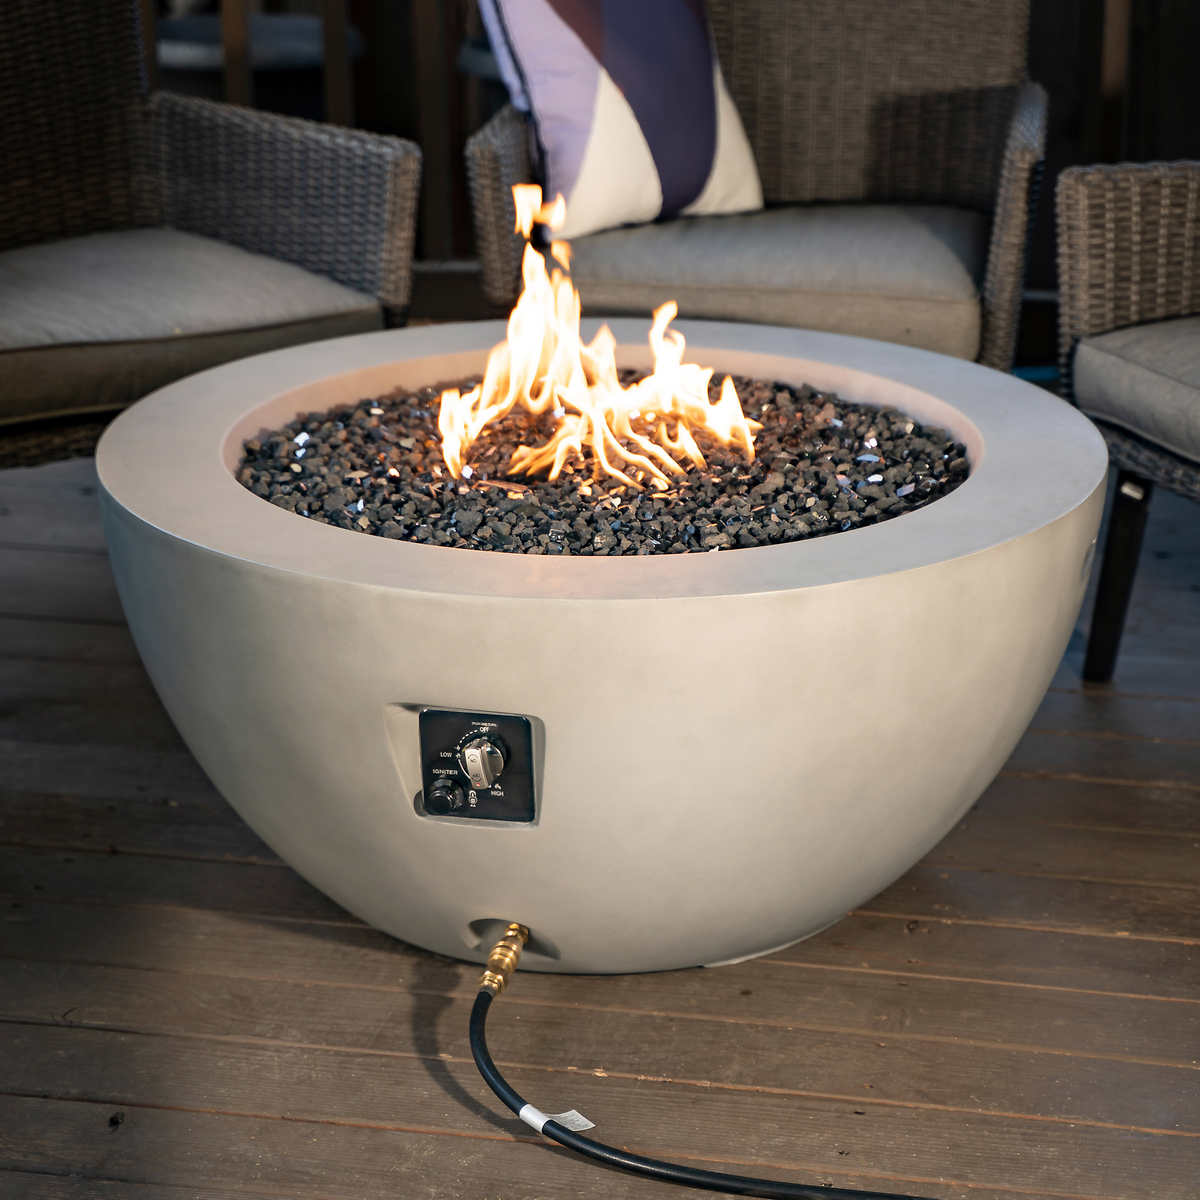 Faux Concrete Gas Fire Pit Costco, Can You Use A Gas Fire Pit On Deck